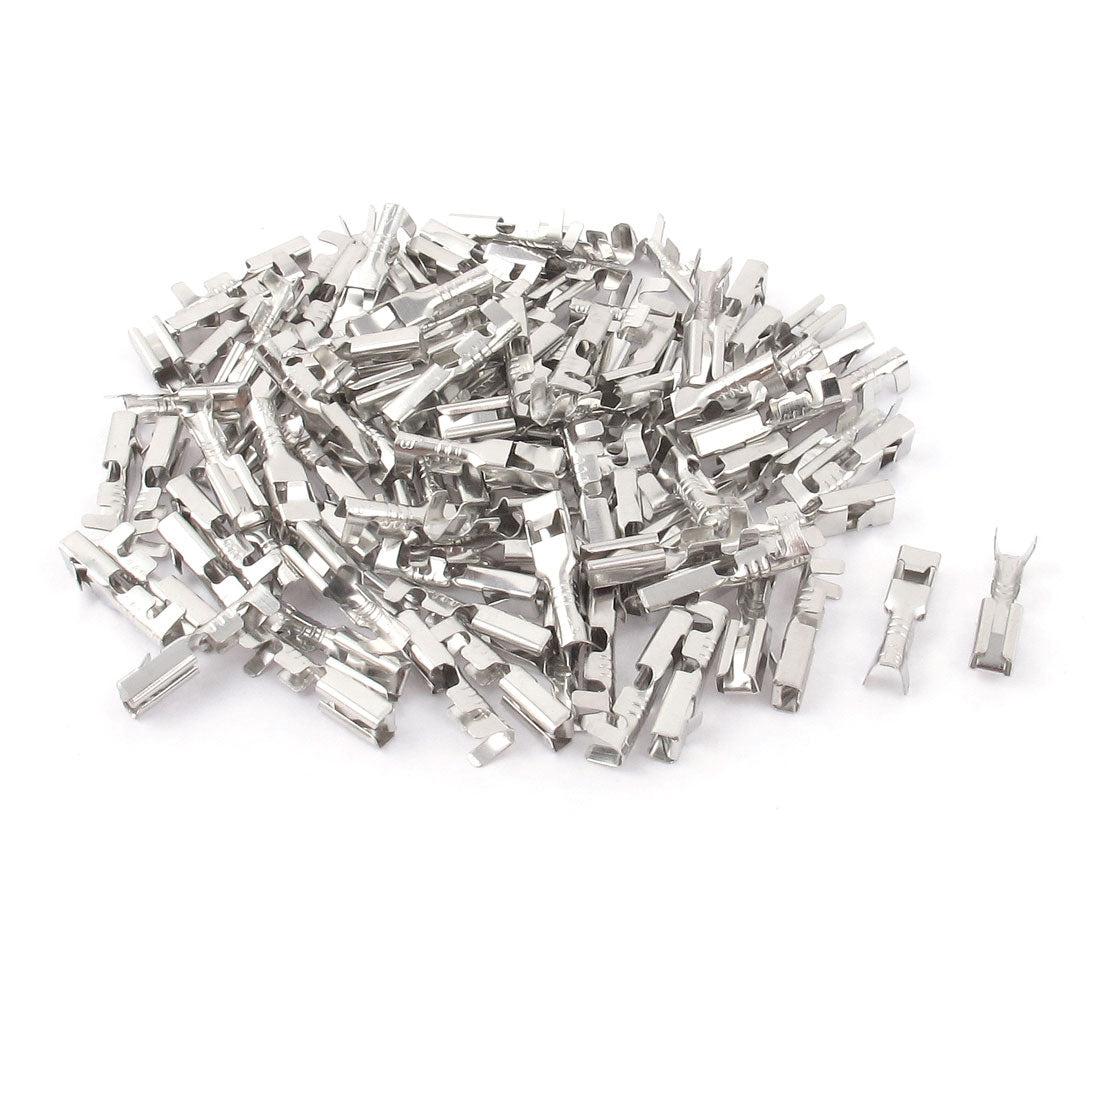 uxcell Uxcell 100Pcs 2.8mm Non Insulation Female Spade Crimp Terminal Electrical Wire Connector